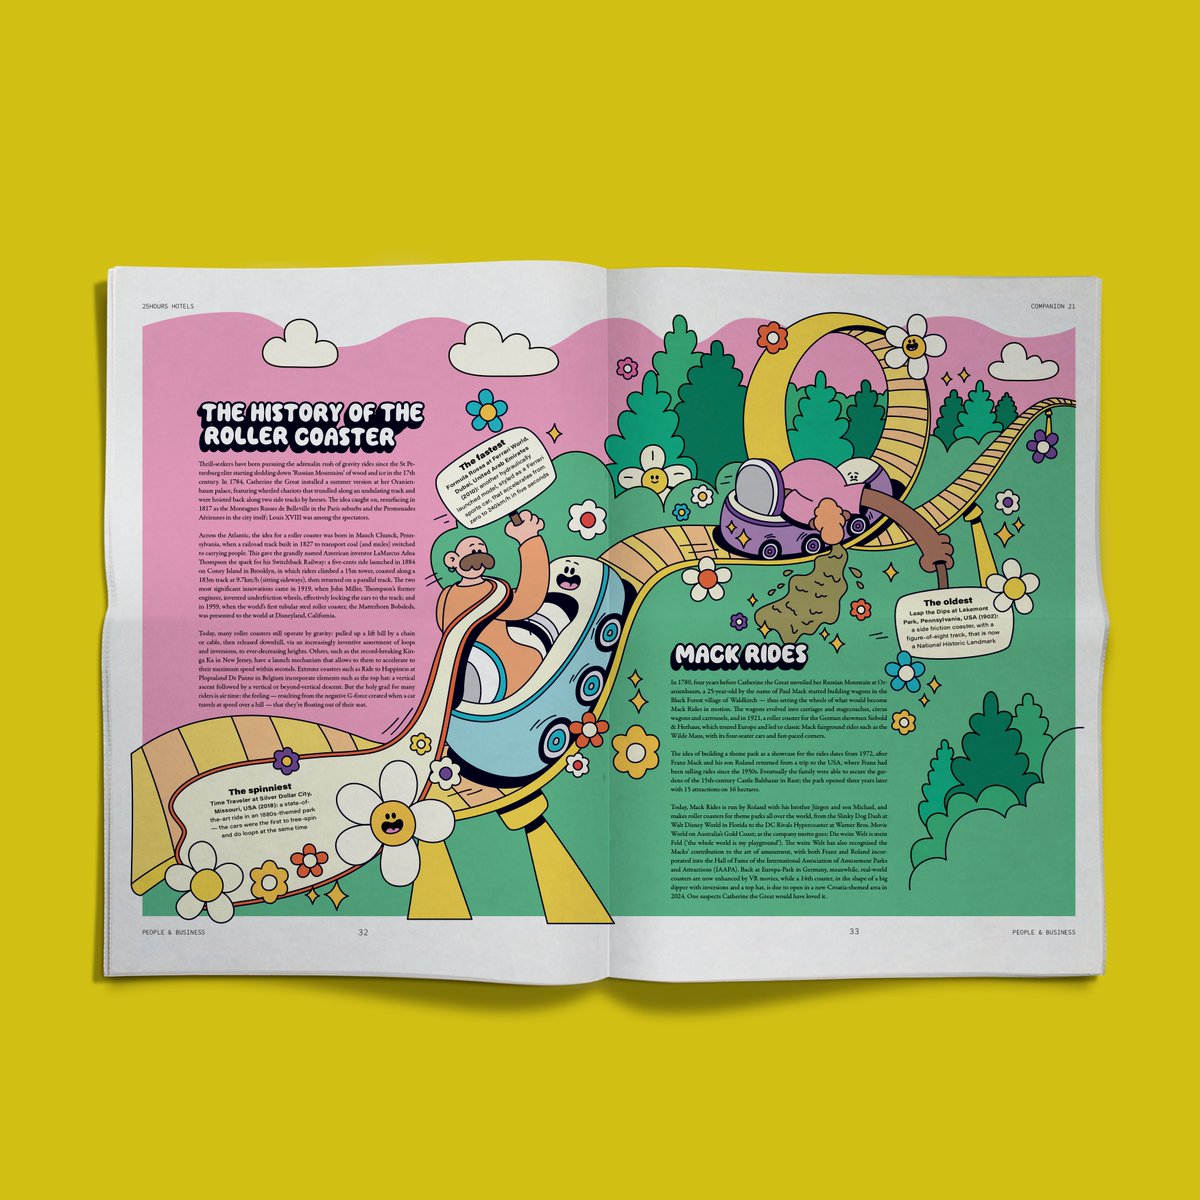 Self confessed roller coaster fan @mcconkeydesign brought his playful sense of humour to this editorial piece for @25hourshotels. His high octane illustration hurtles you through a track-load of coaster facts so buckle up and join the ride...if your stomach can handle it.